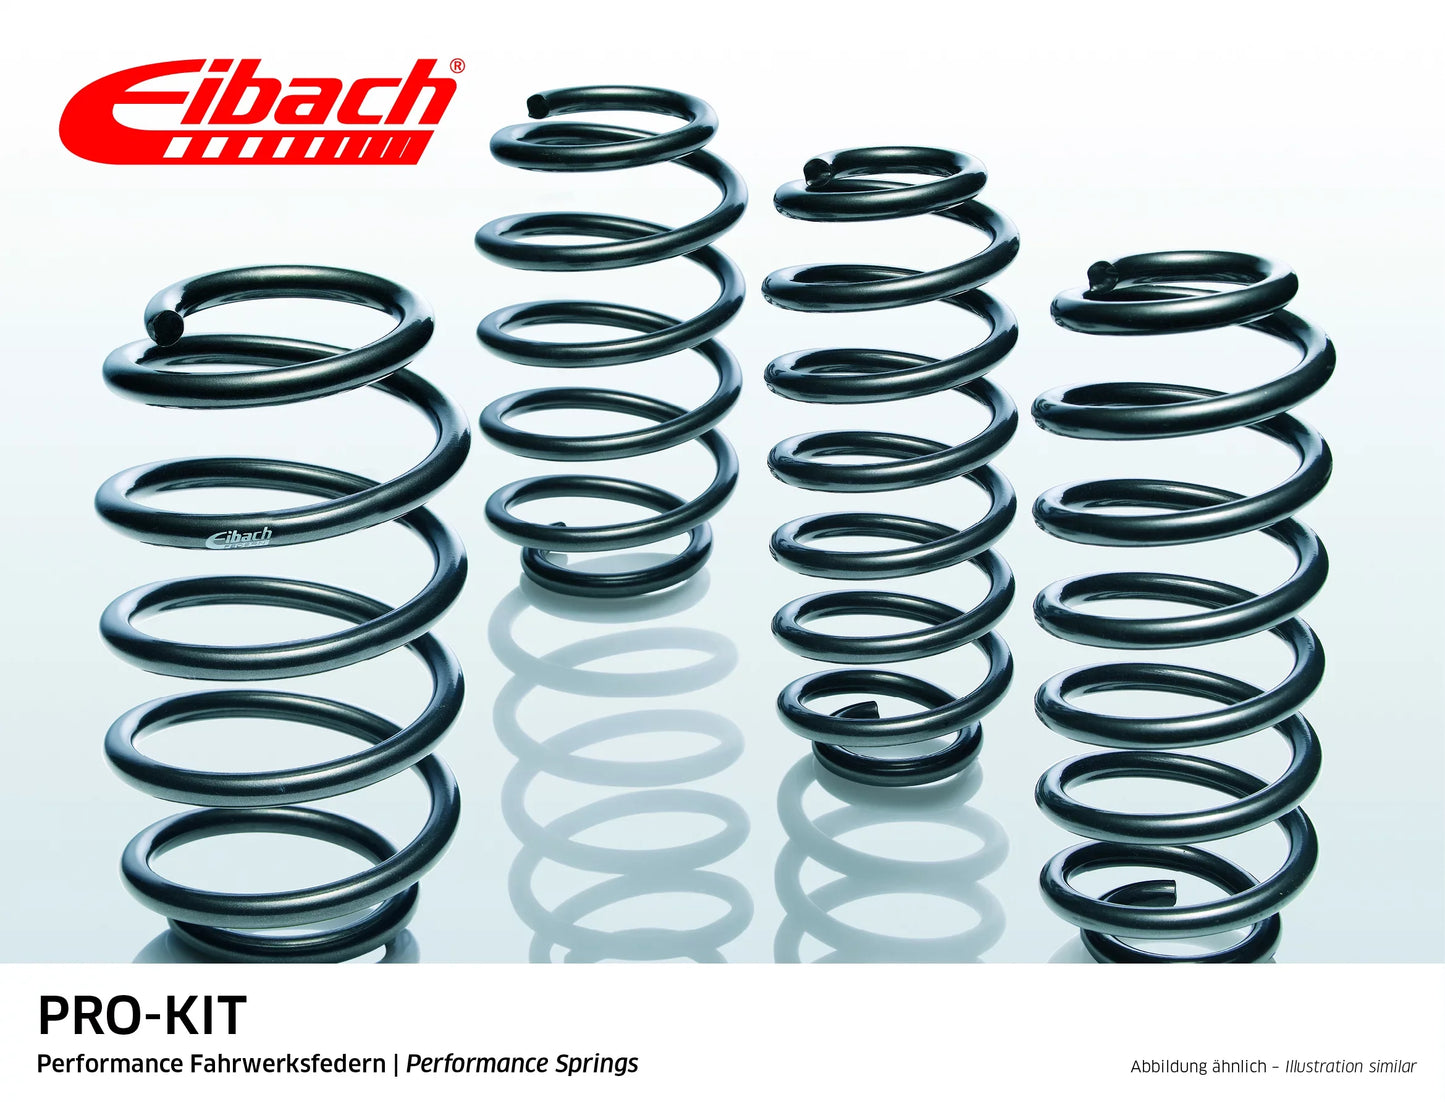 Eibach Pro-Kit Lowering Springs (E10-15-024-04-22) at £269.98